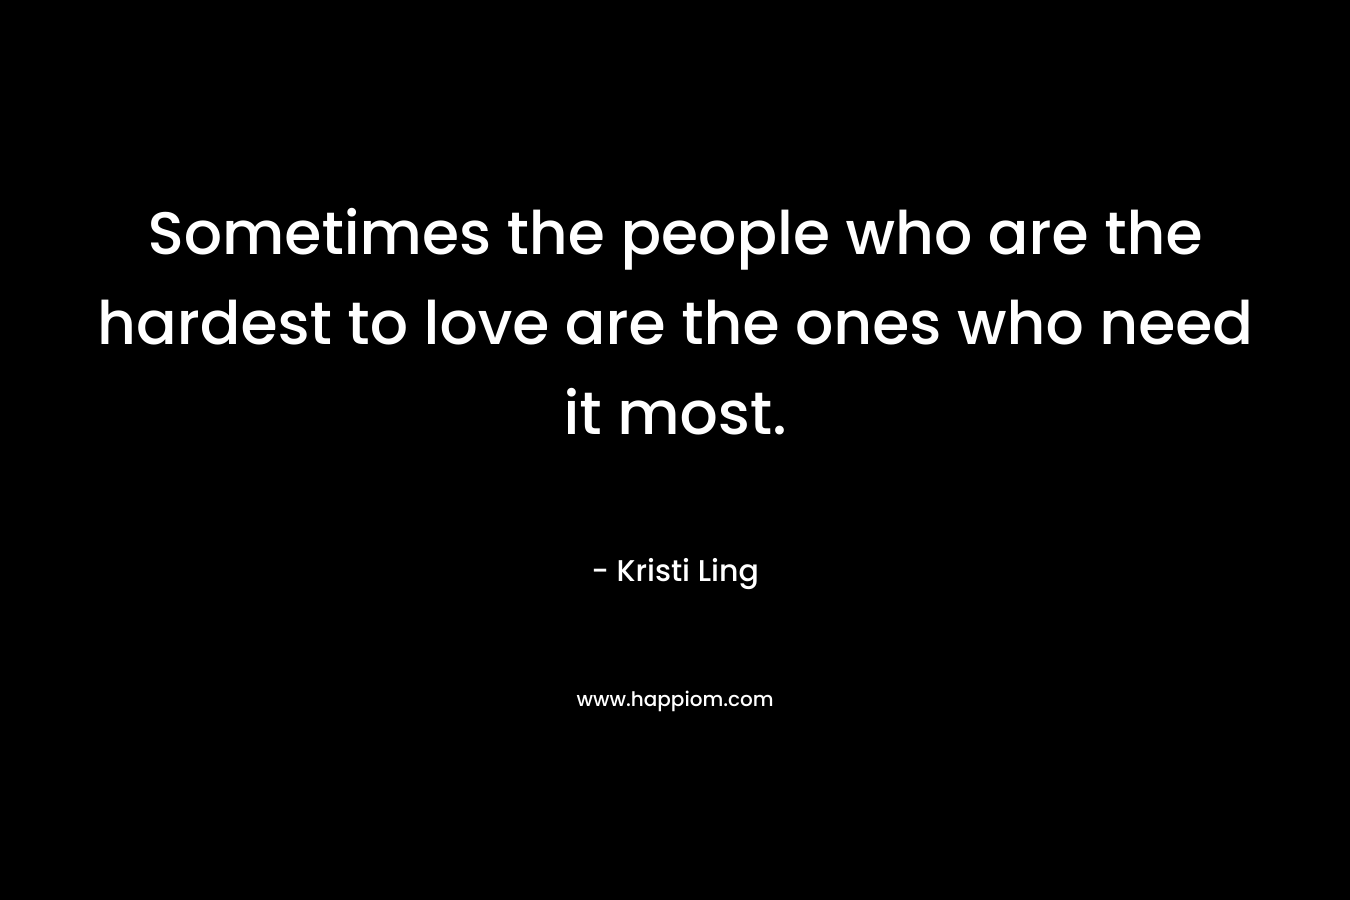 Sometimes the people who are the hardest to love are the ones who need it most.